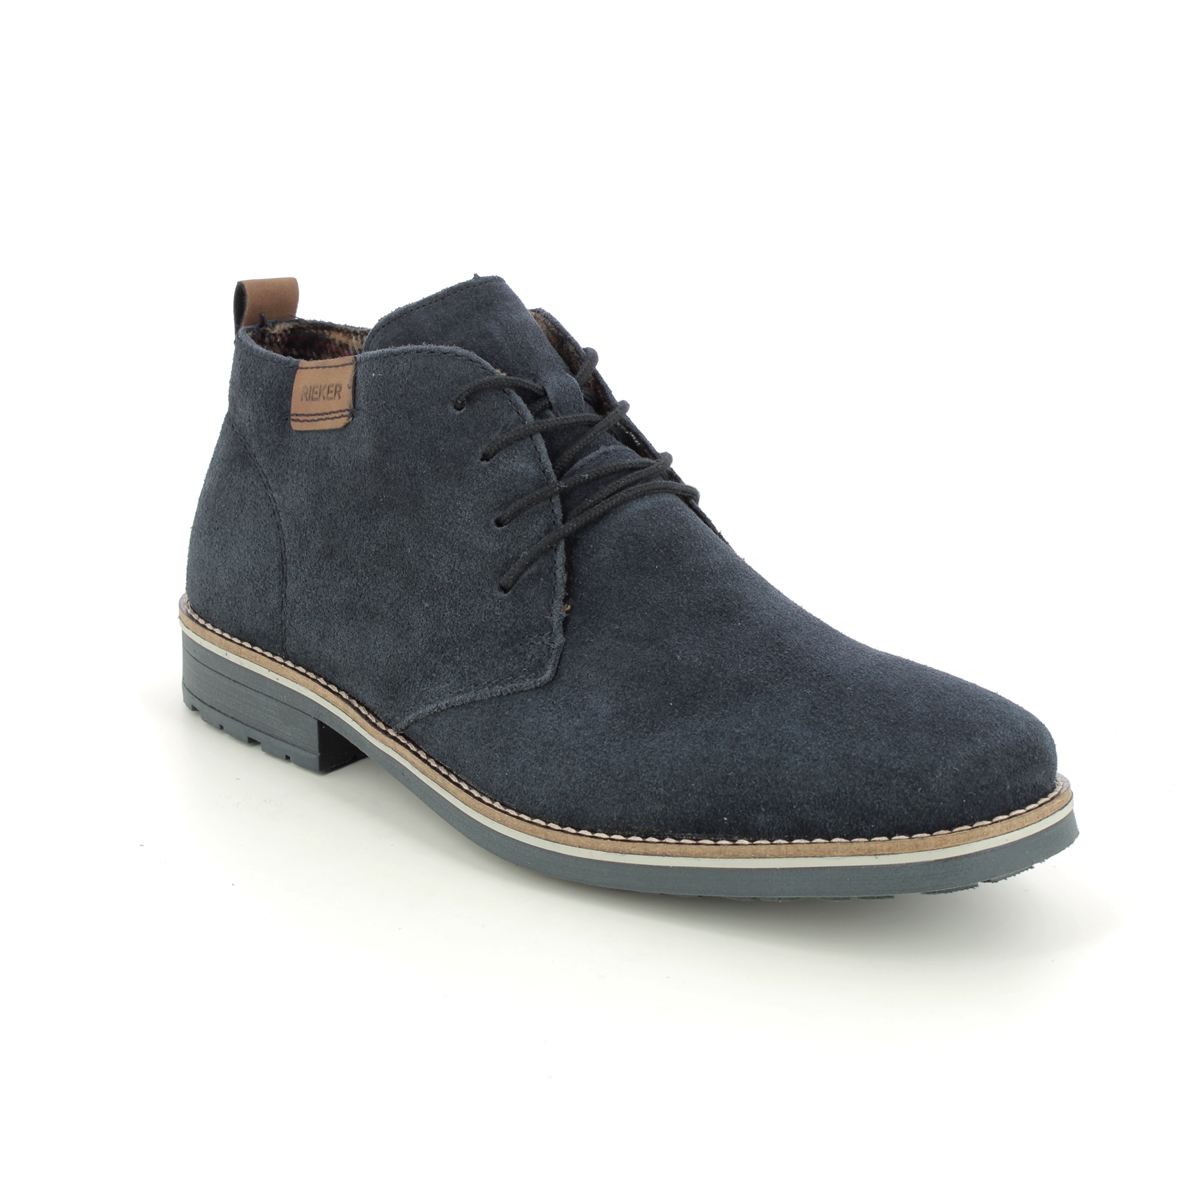 Rieker 33206-14 Navy Suede Mens Chukka Boots in a Plain Leather in Size 42